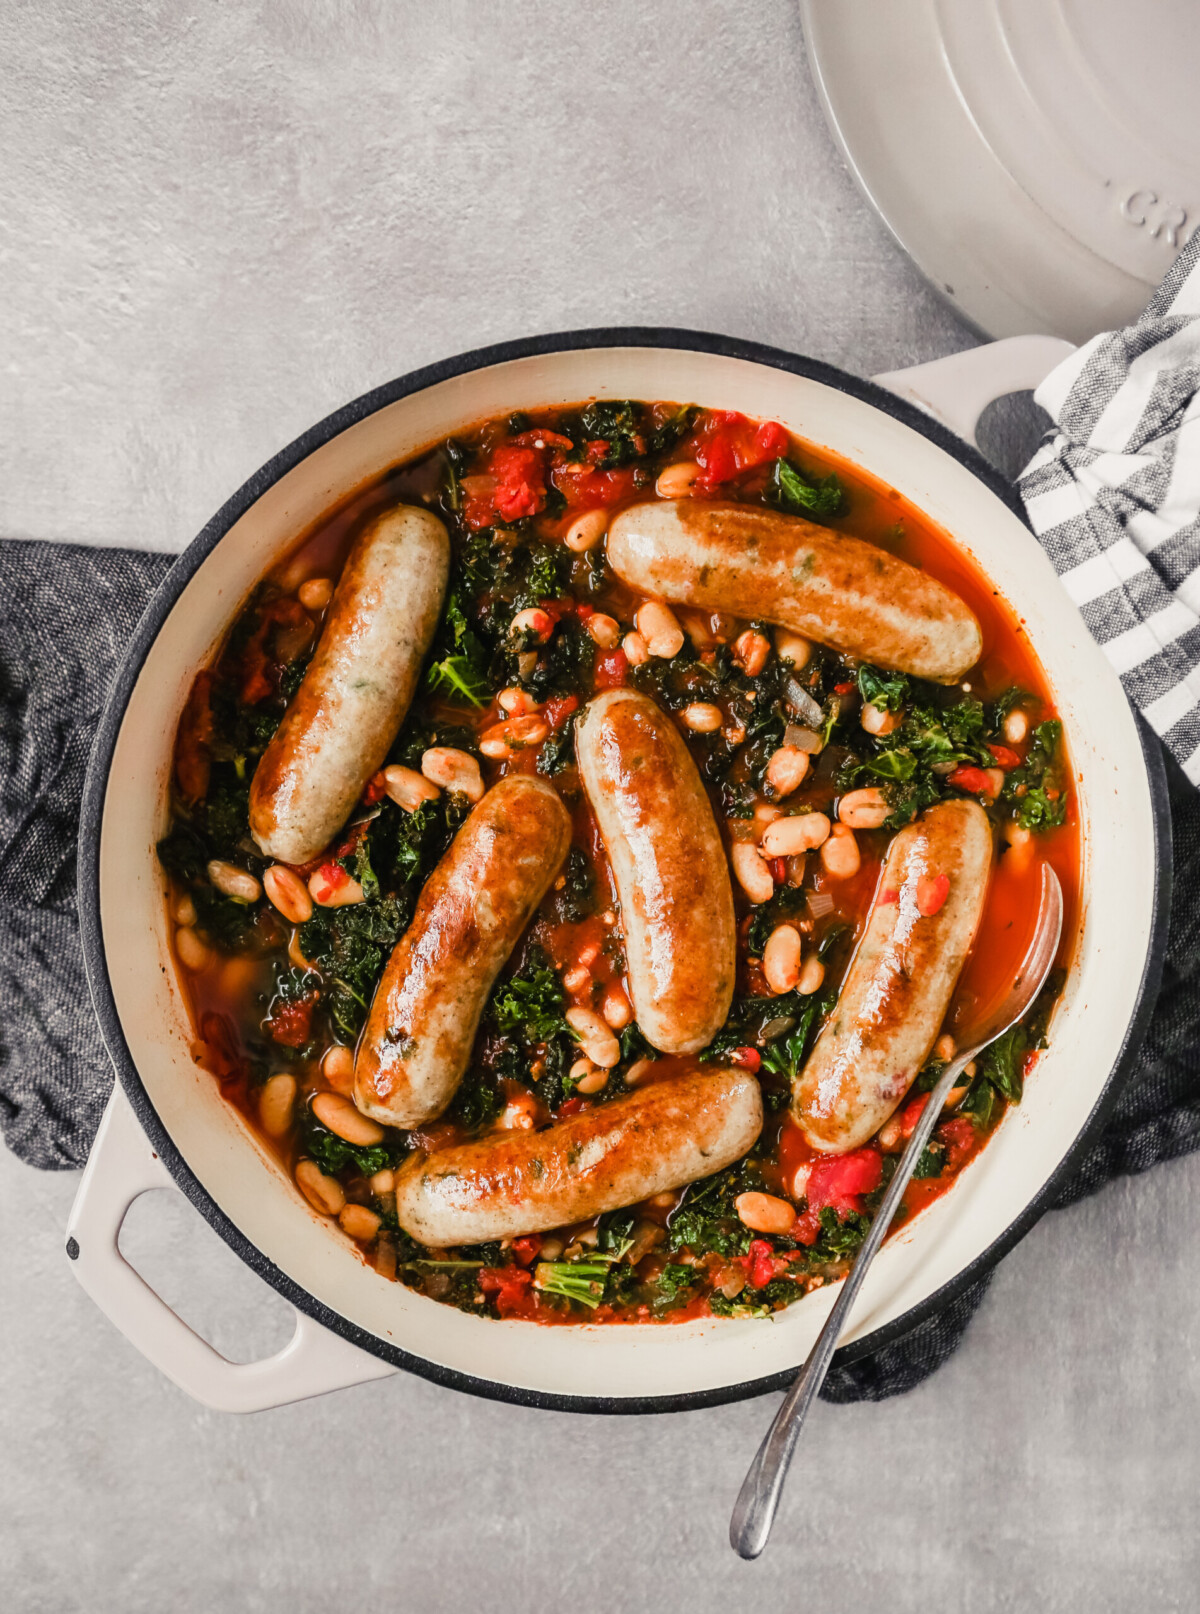 Italian Chicken Sausage Recipe with White Beans & Kale | Zestful Kitchen How Long Does Johnsonville Italian Sausage Last In The Fridge